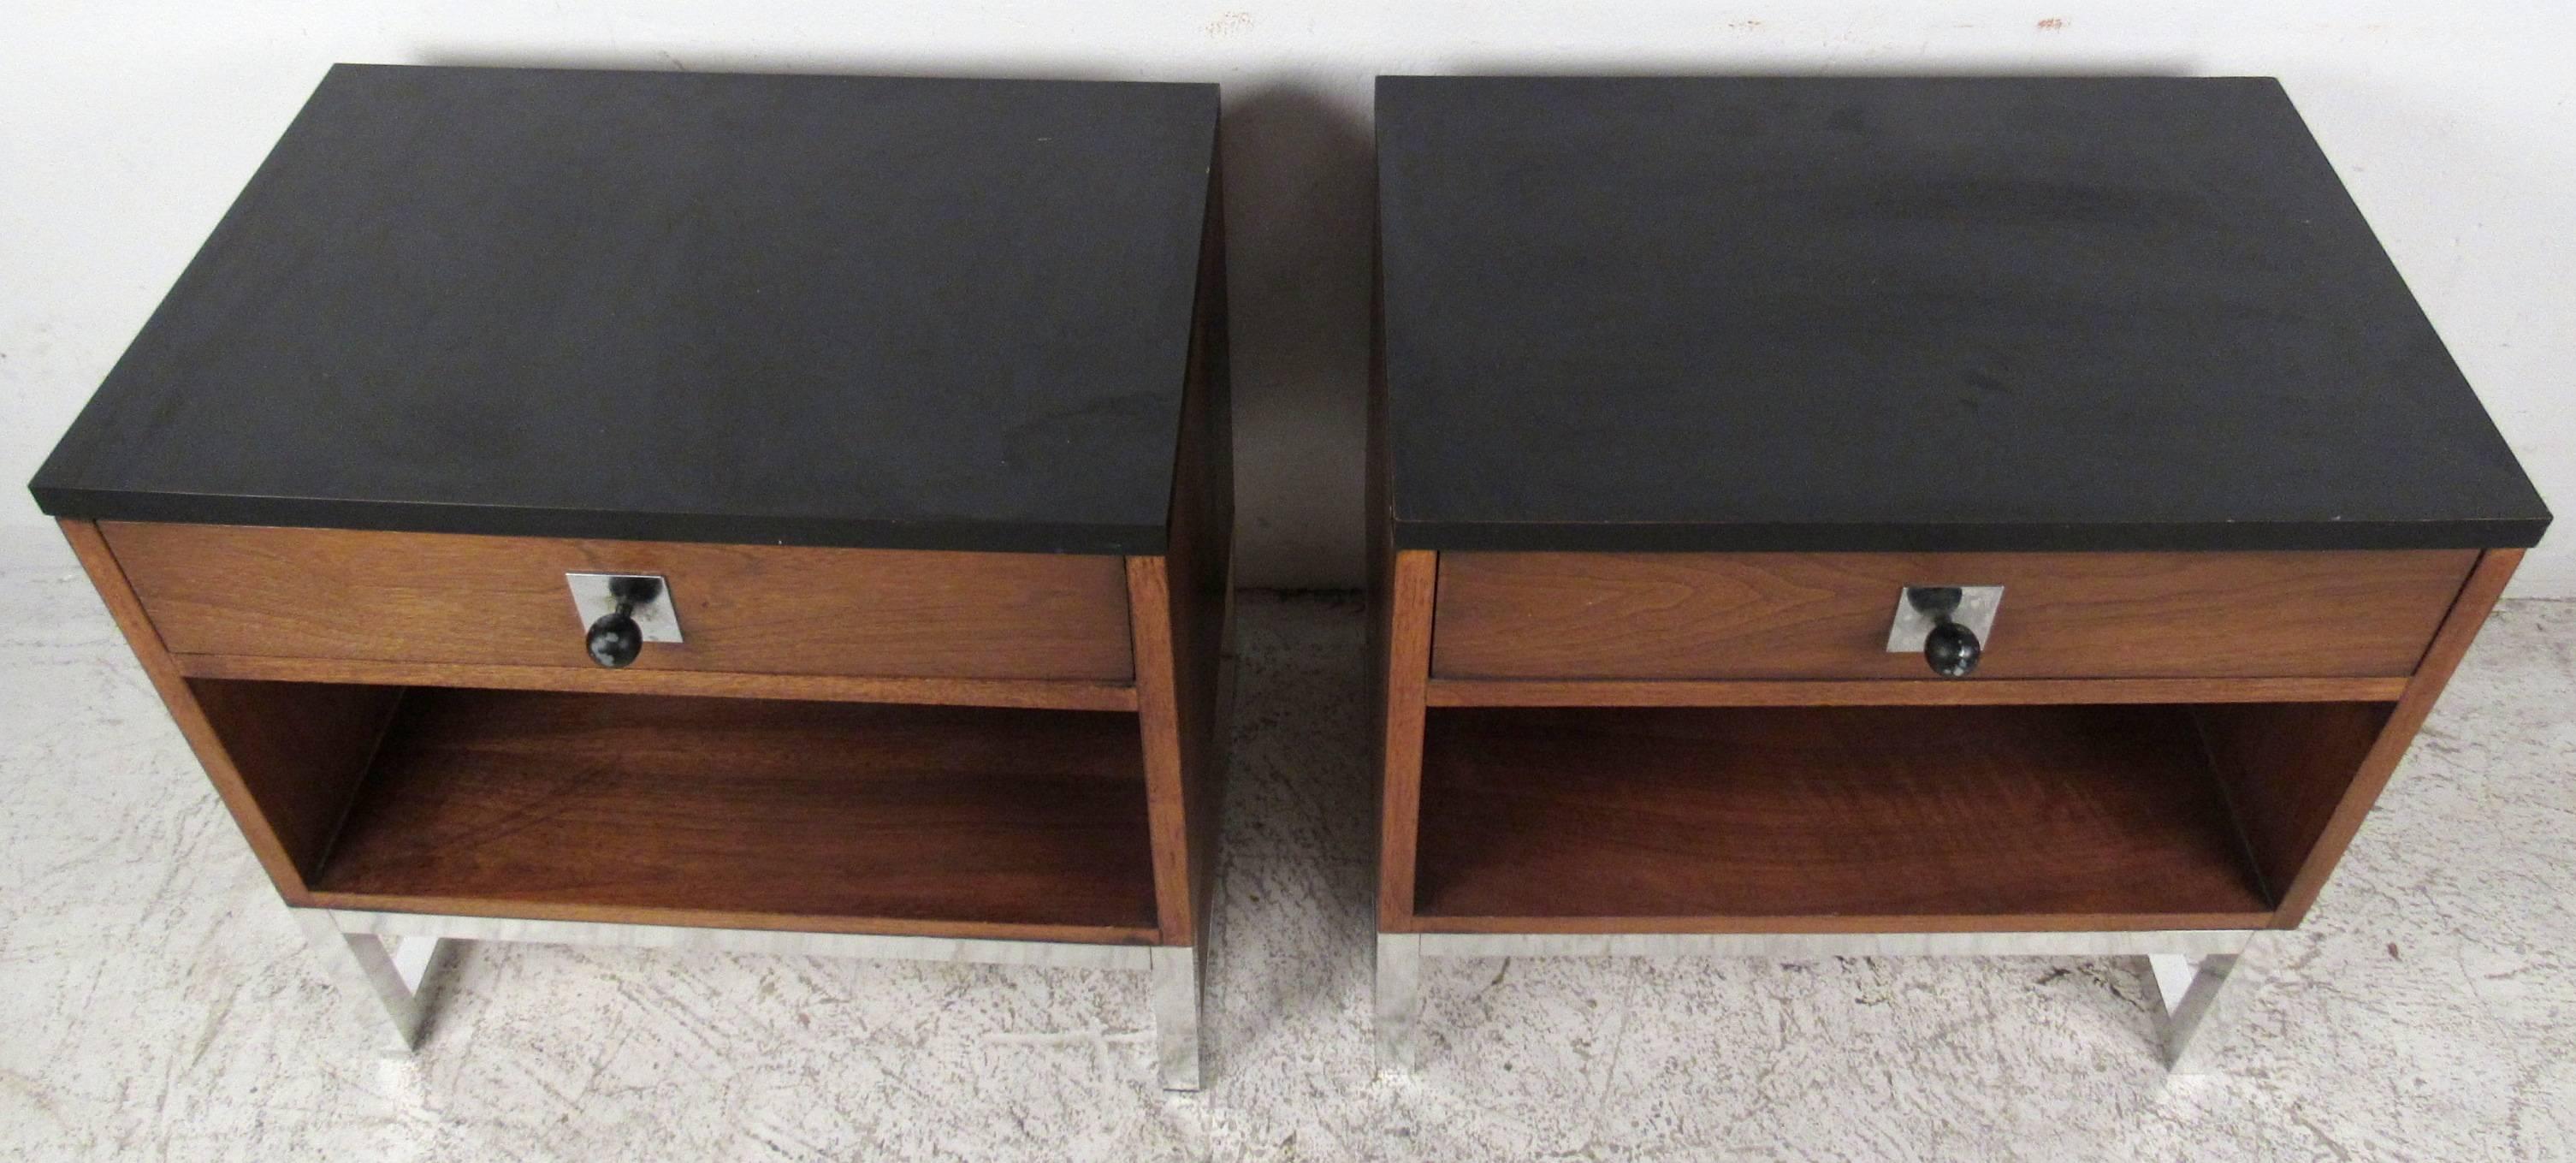 Two vintage-modern nightstands featuring chrome base, rich walnut grain and formica top, designed in the manner of John Stuart. Impressive mid-century design adds both style and storage to home or office. 

Please confirm item location NY or NJ with